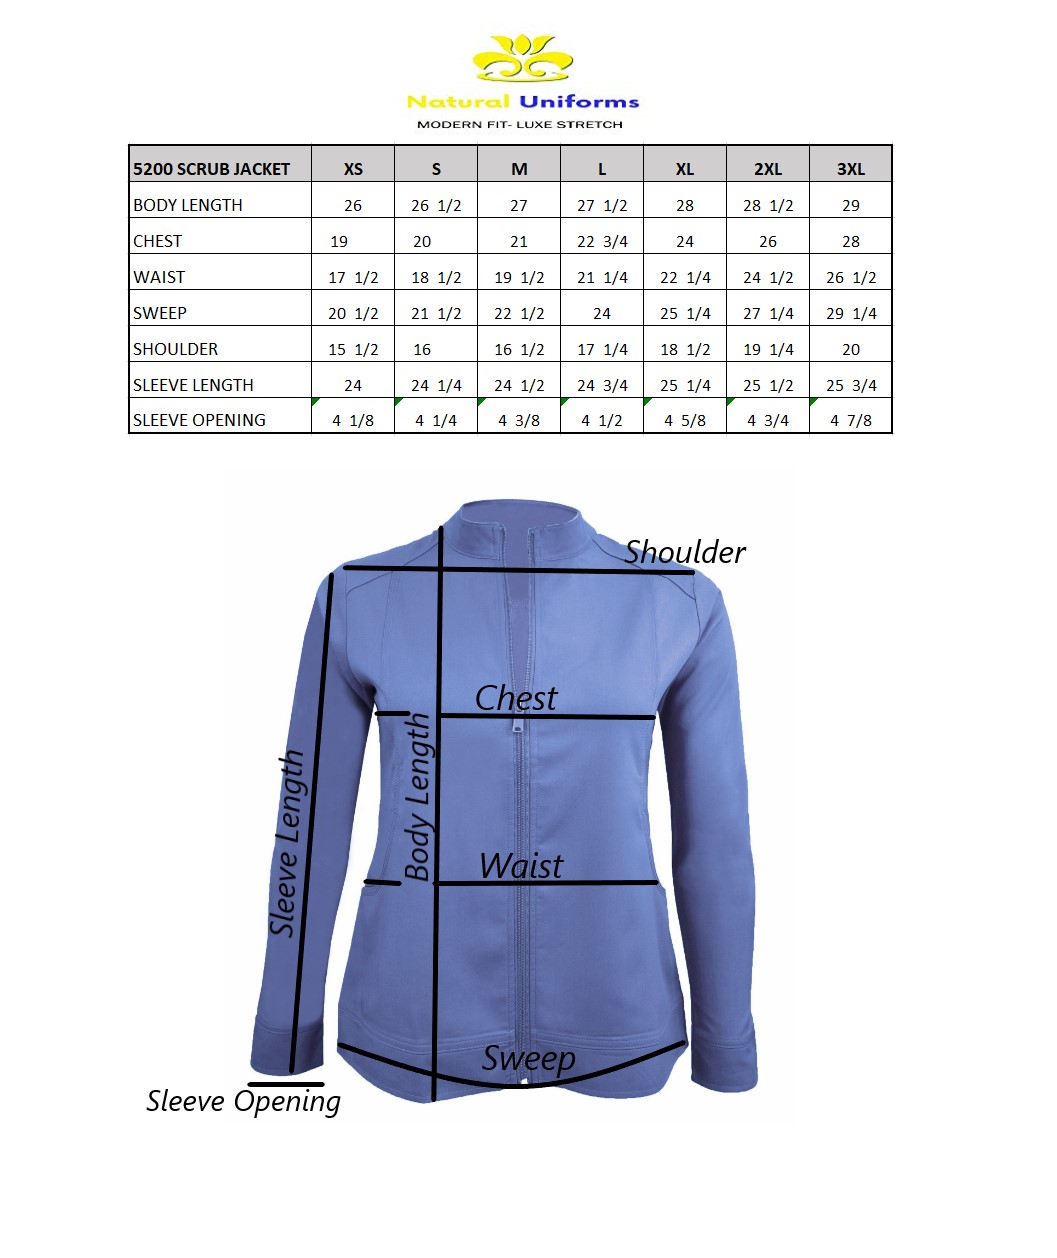 NATURAL UNIFORMS WOMENS SOFT STRETCH SCRUB JACKET AND WARM UP JACKET - image 3 of 3